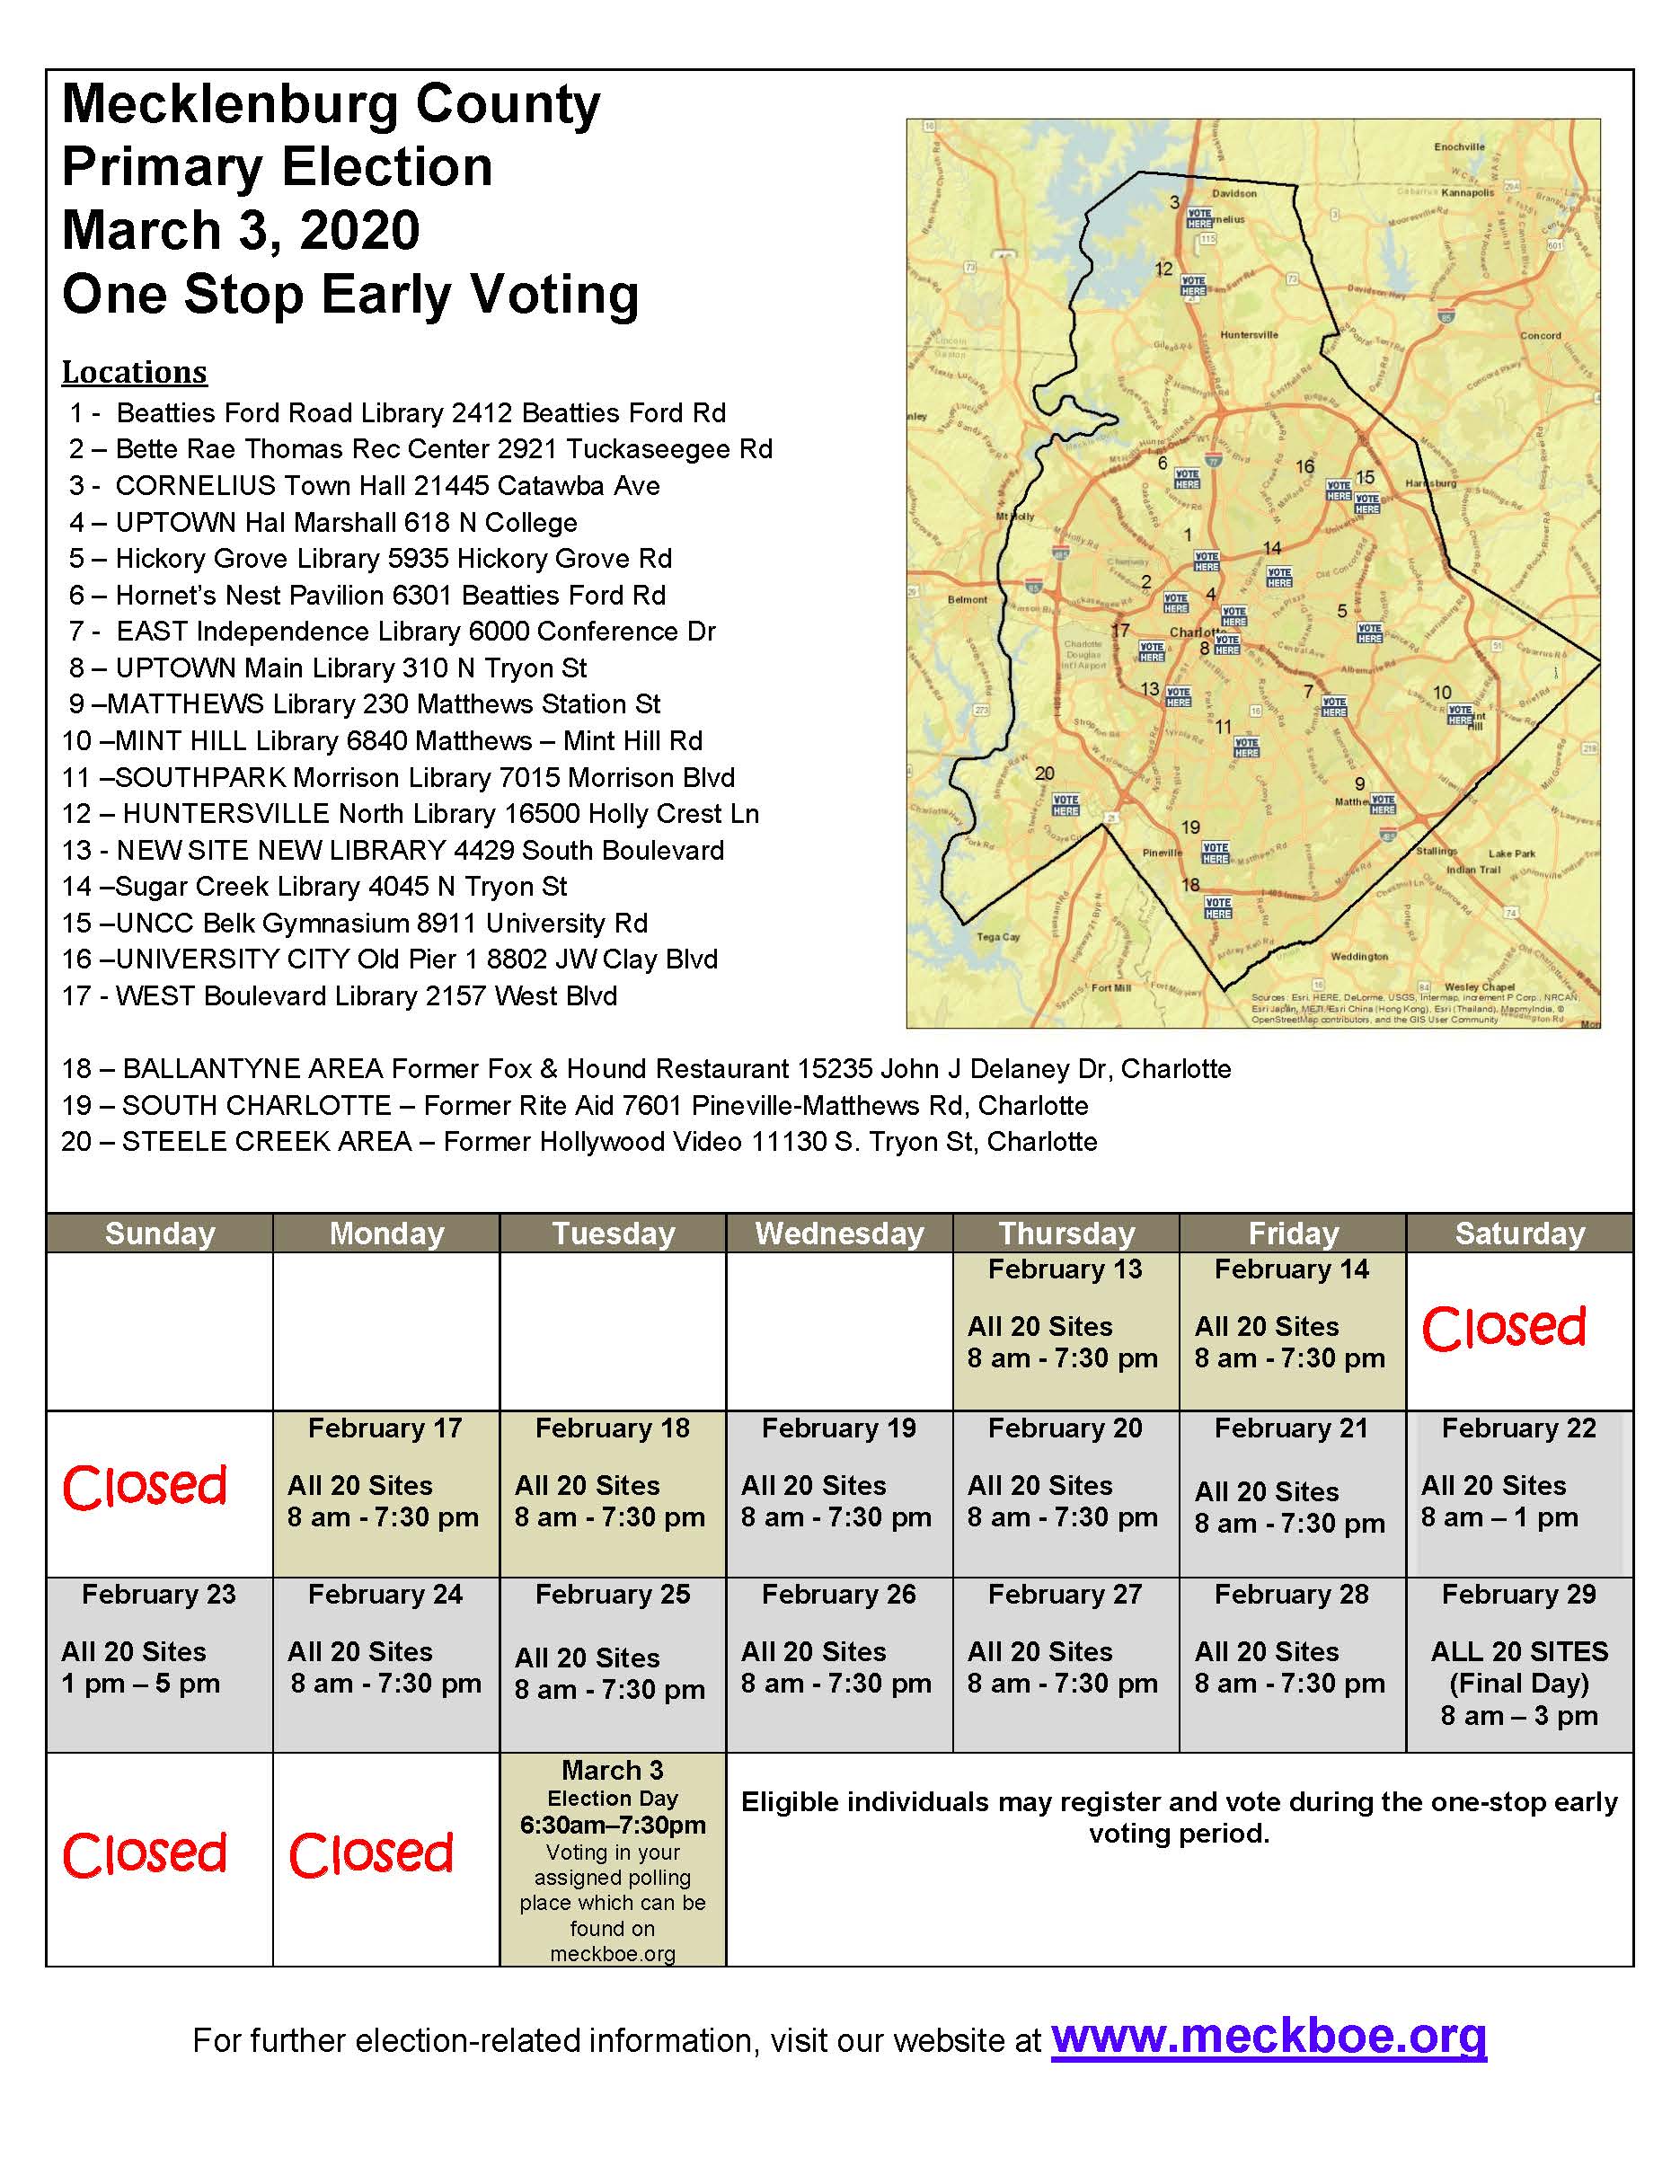 Early Voting Details for March 3rd Primary